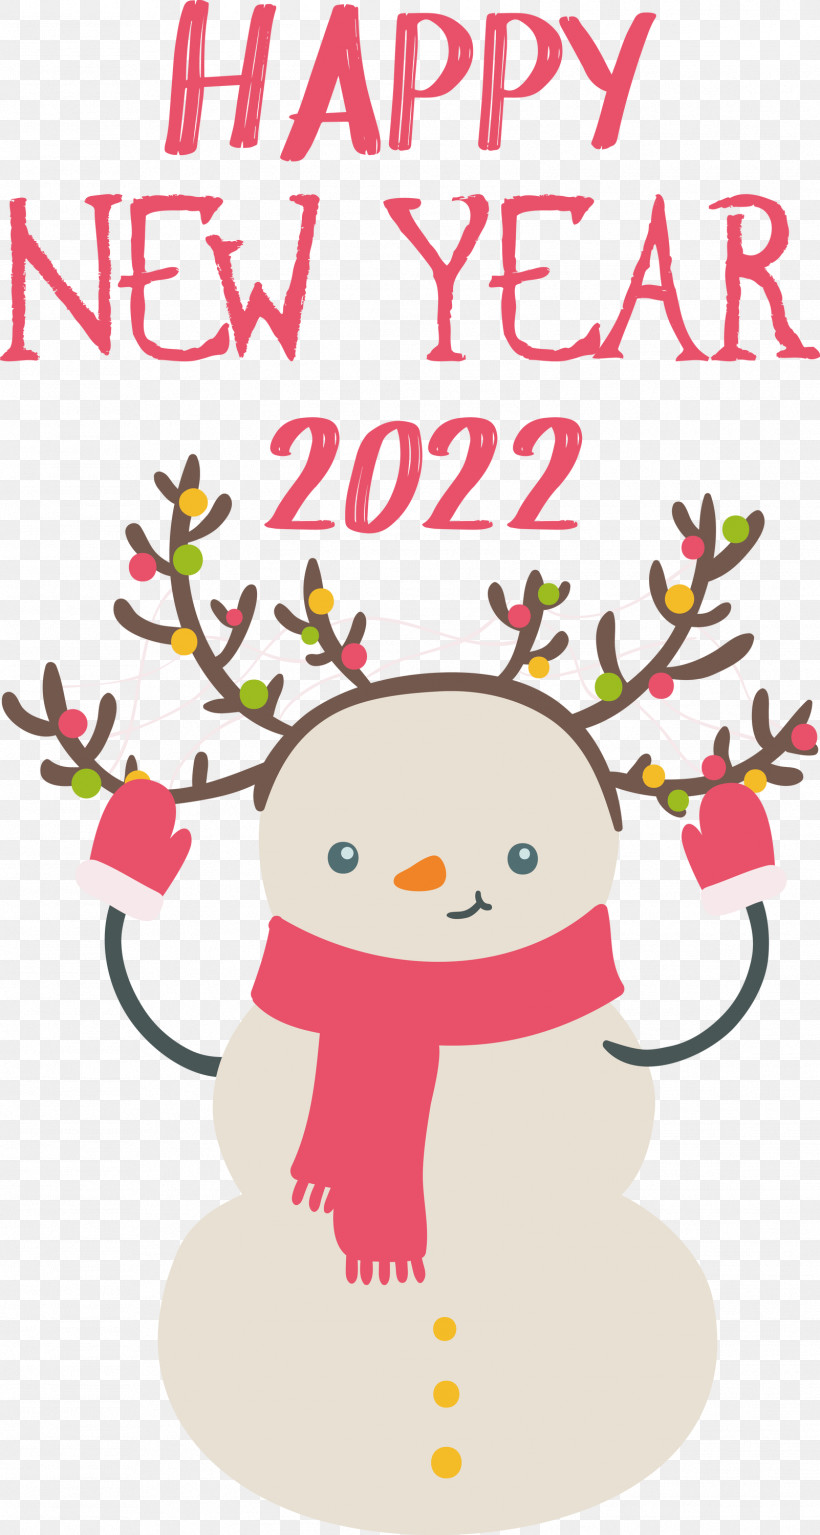 Happy New Year 2022 2022 New Year 2022, PNG, 1602x3000px, Christmas Day, Bauble, Christmas Tree, Holiday, New Year Download Free